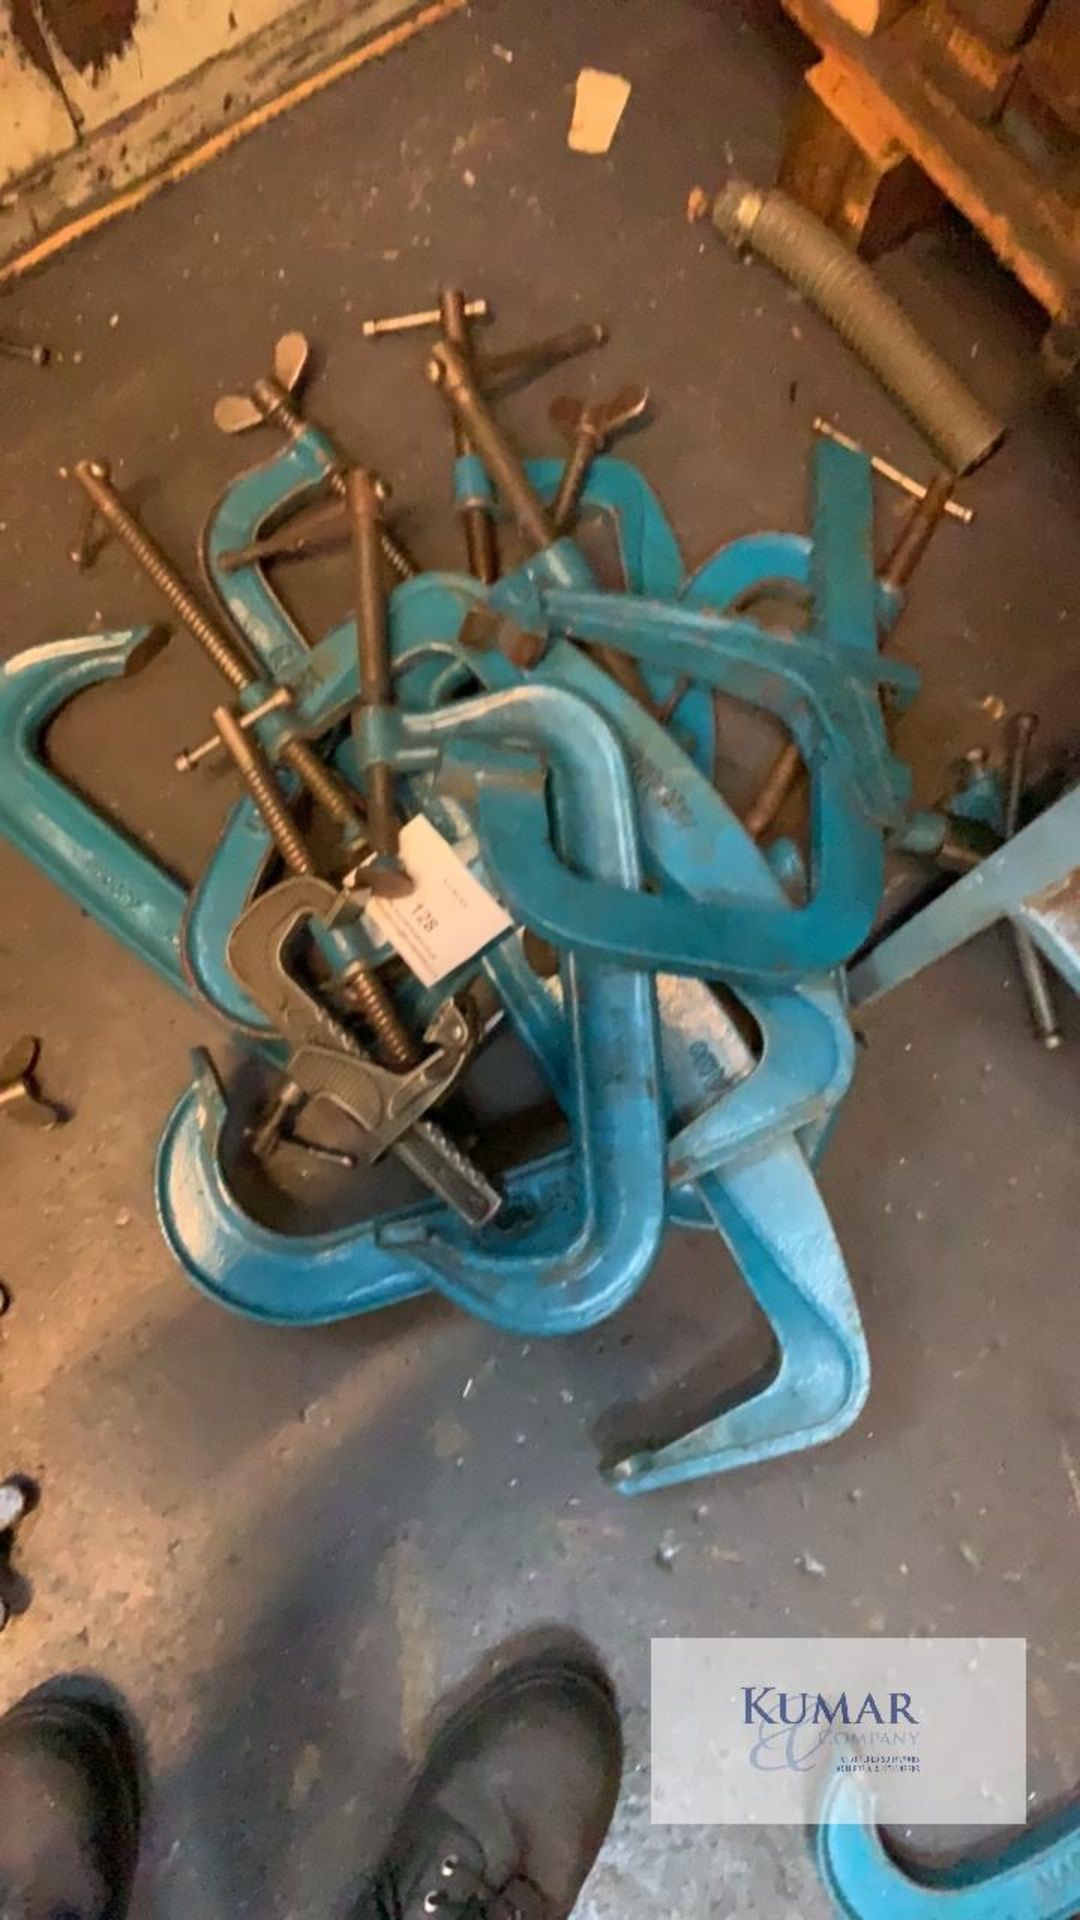 Large G Clamps 12 x various sizes